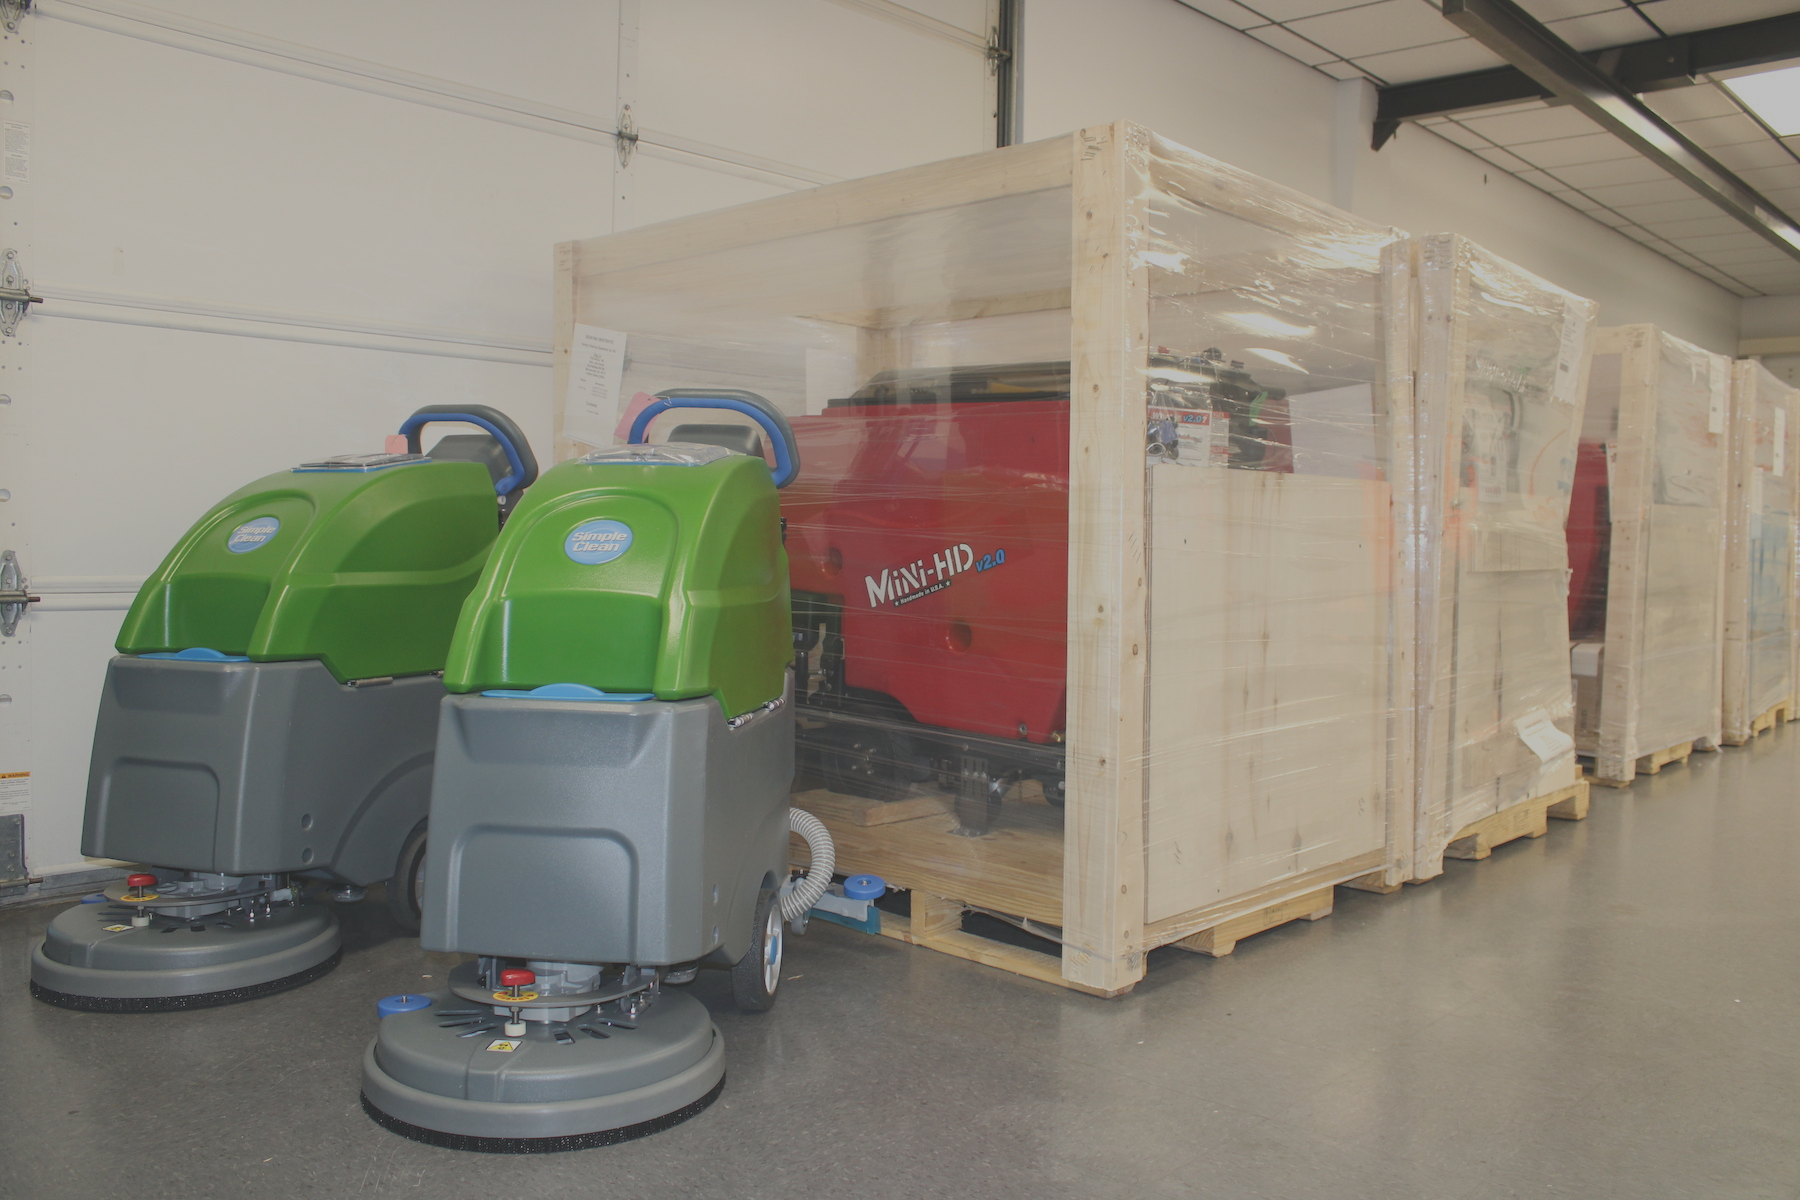 walk behind floor scrubbers ready to ship from warehouse